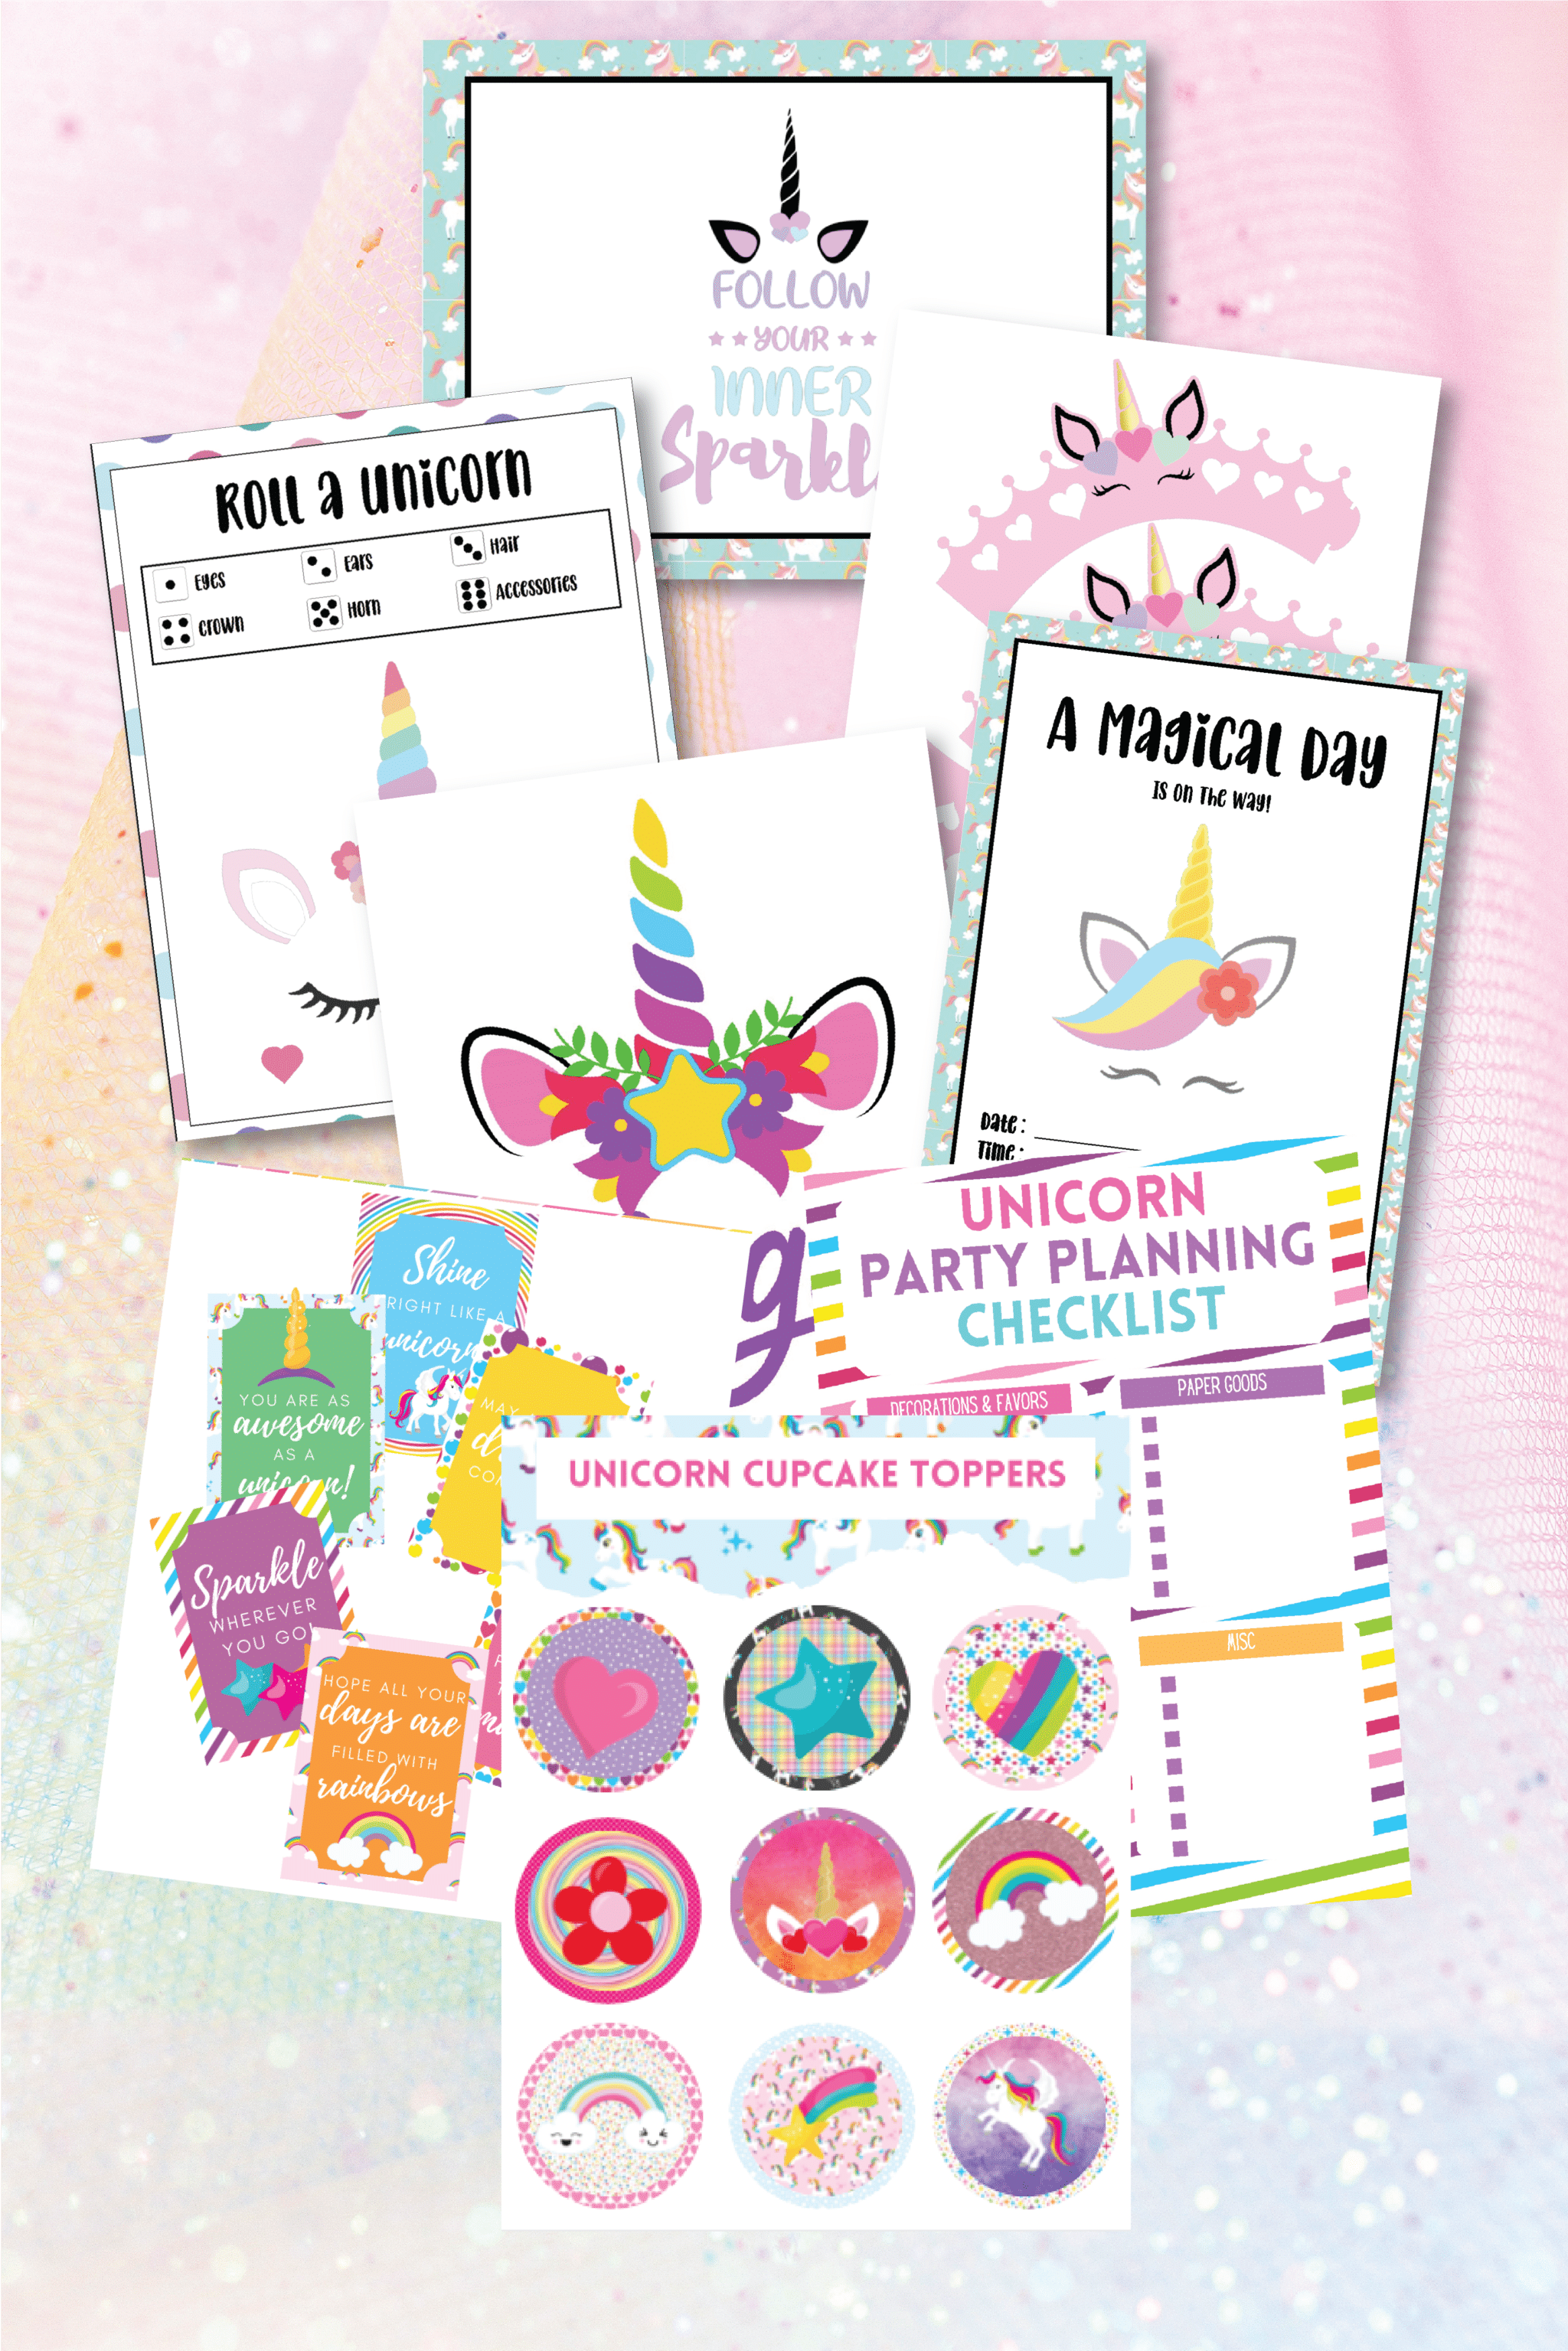 Variety of unicorn party printables and other images